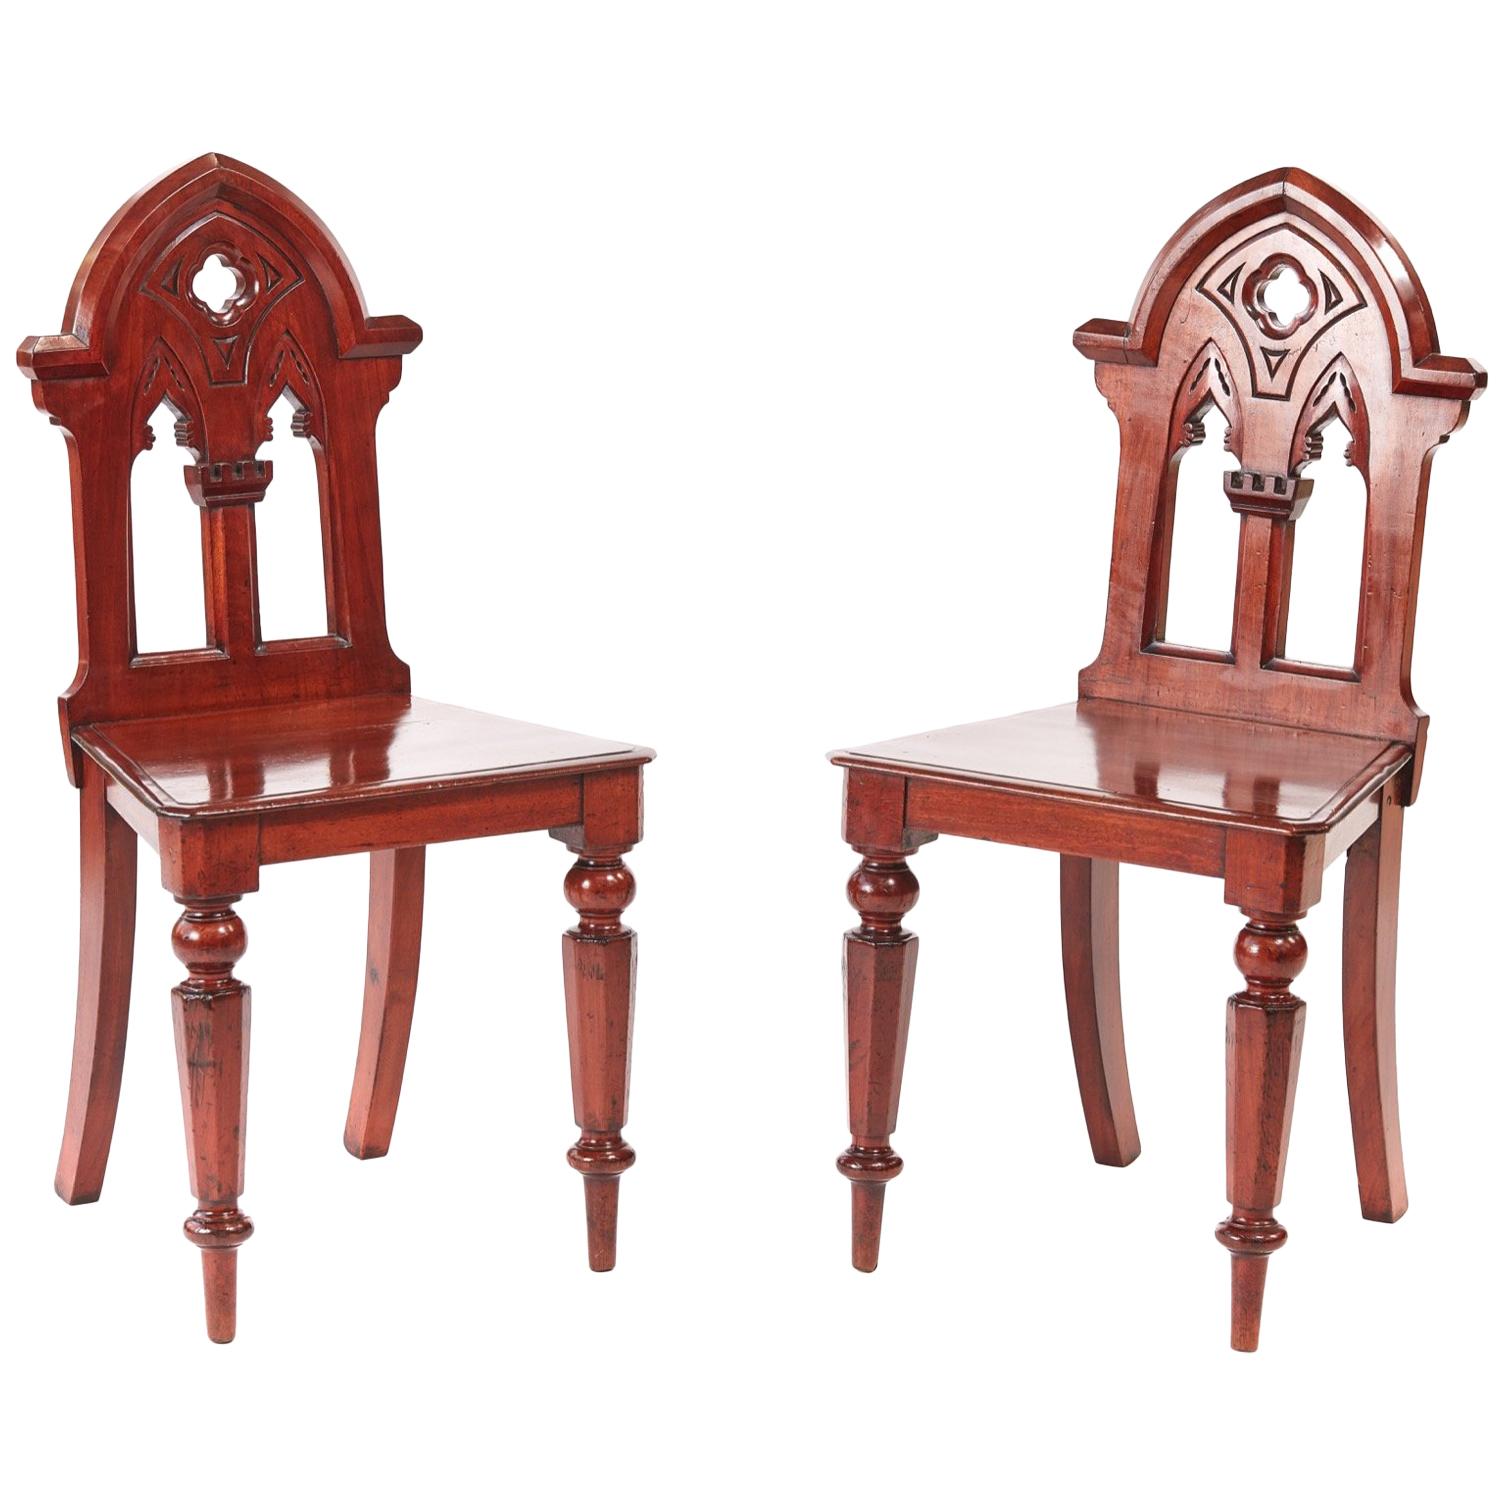 Pair of Antique Victorian Mahogany Gothic Hall Chairs